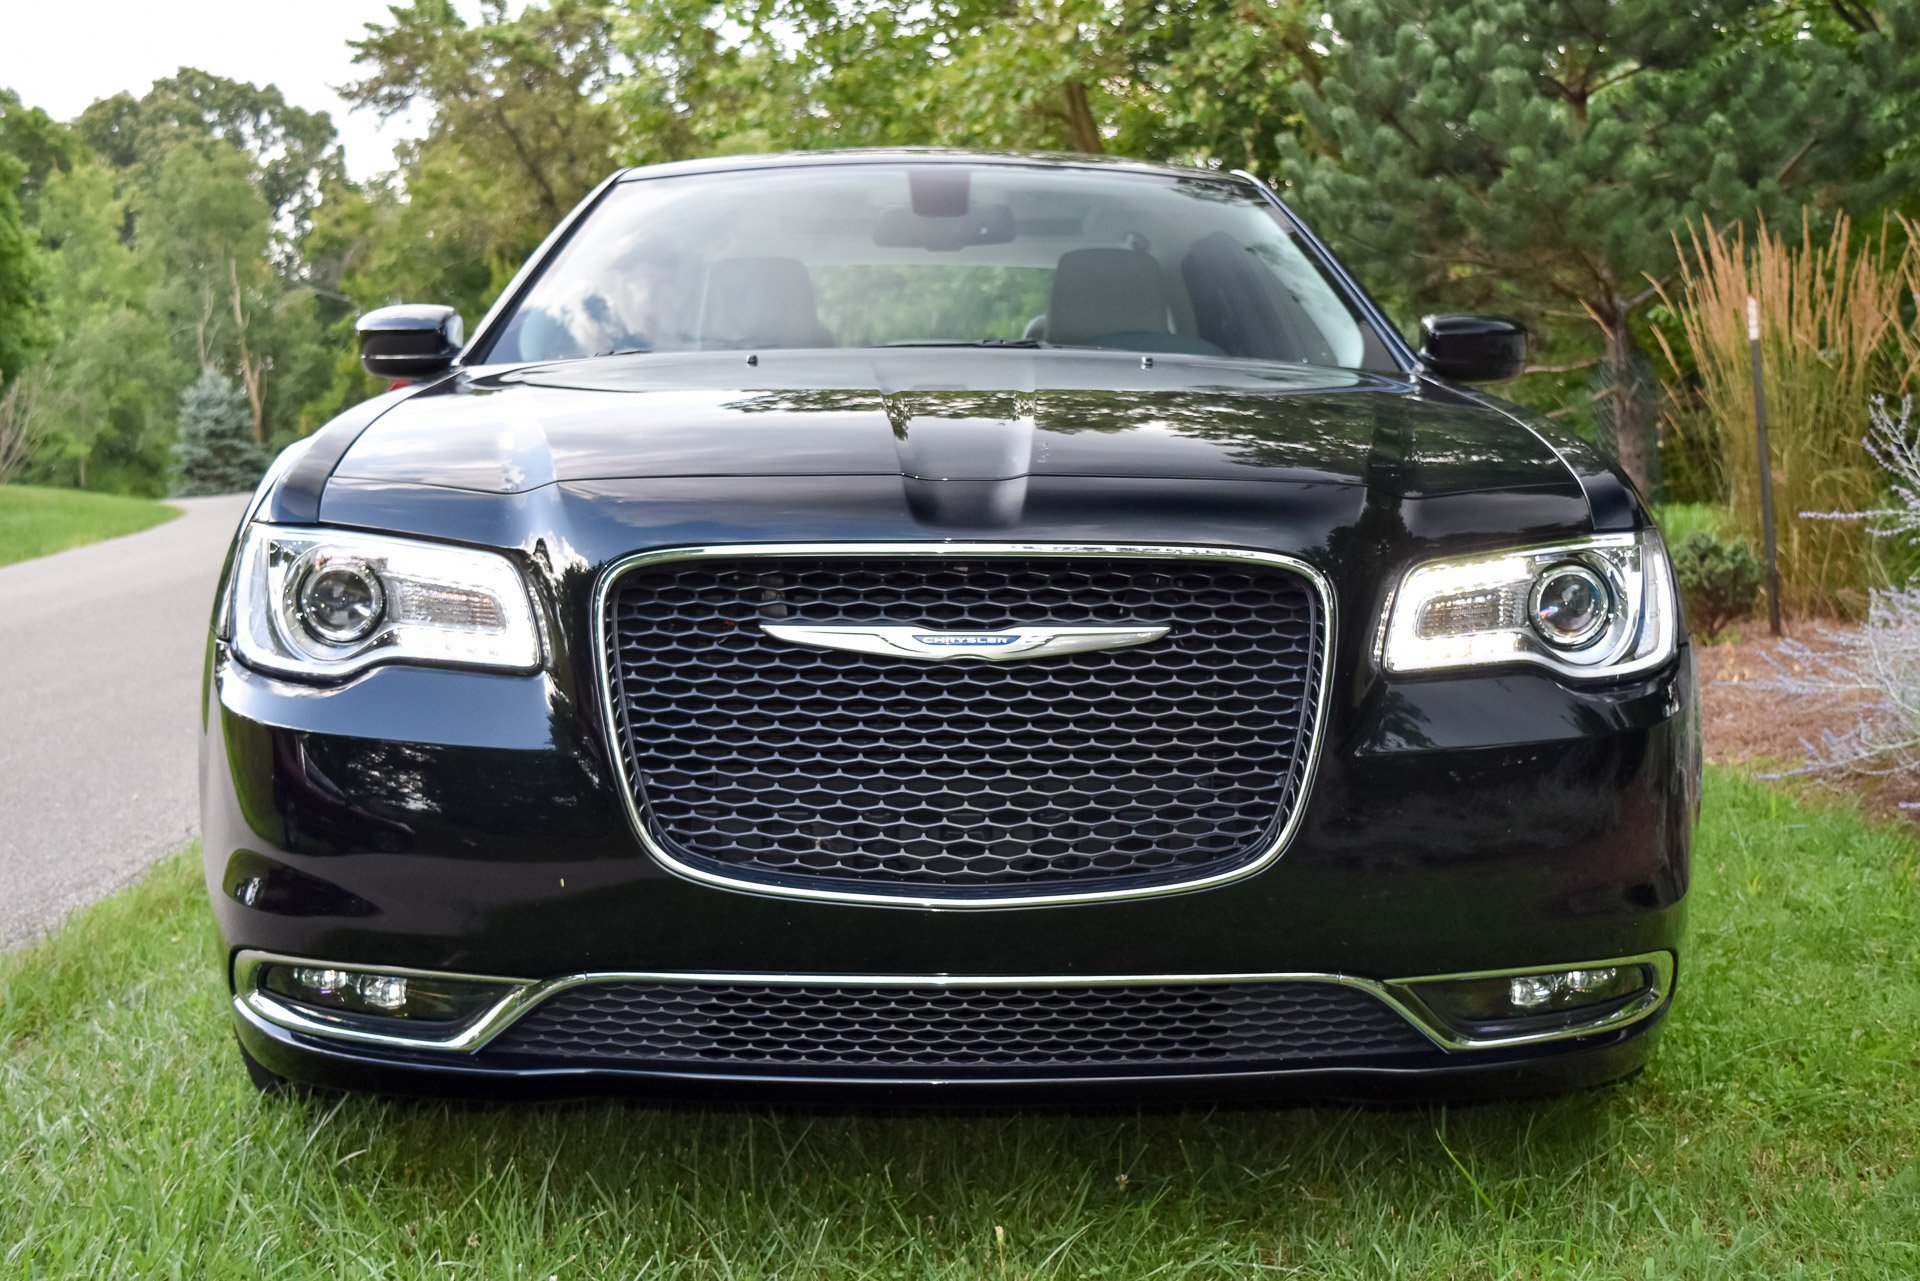 Review: 2016 Chrysler 300 Limited